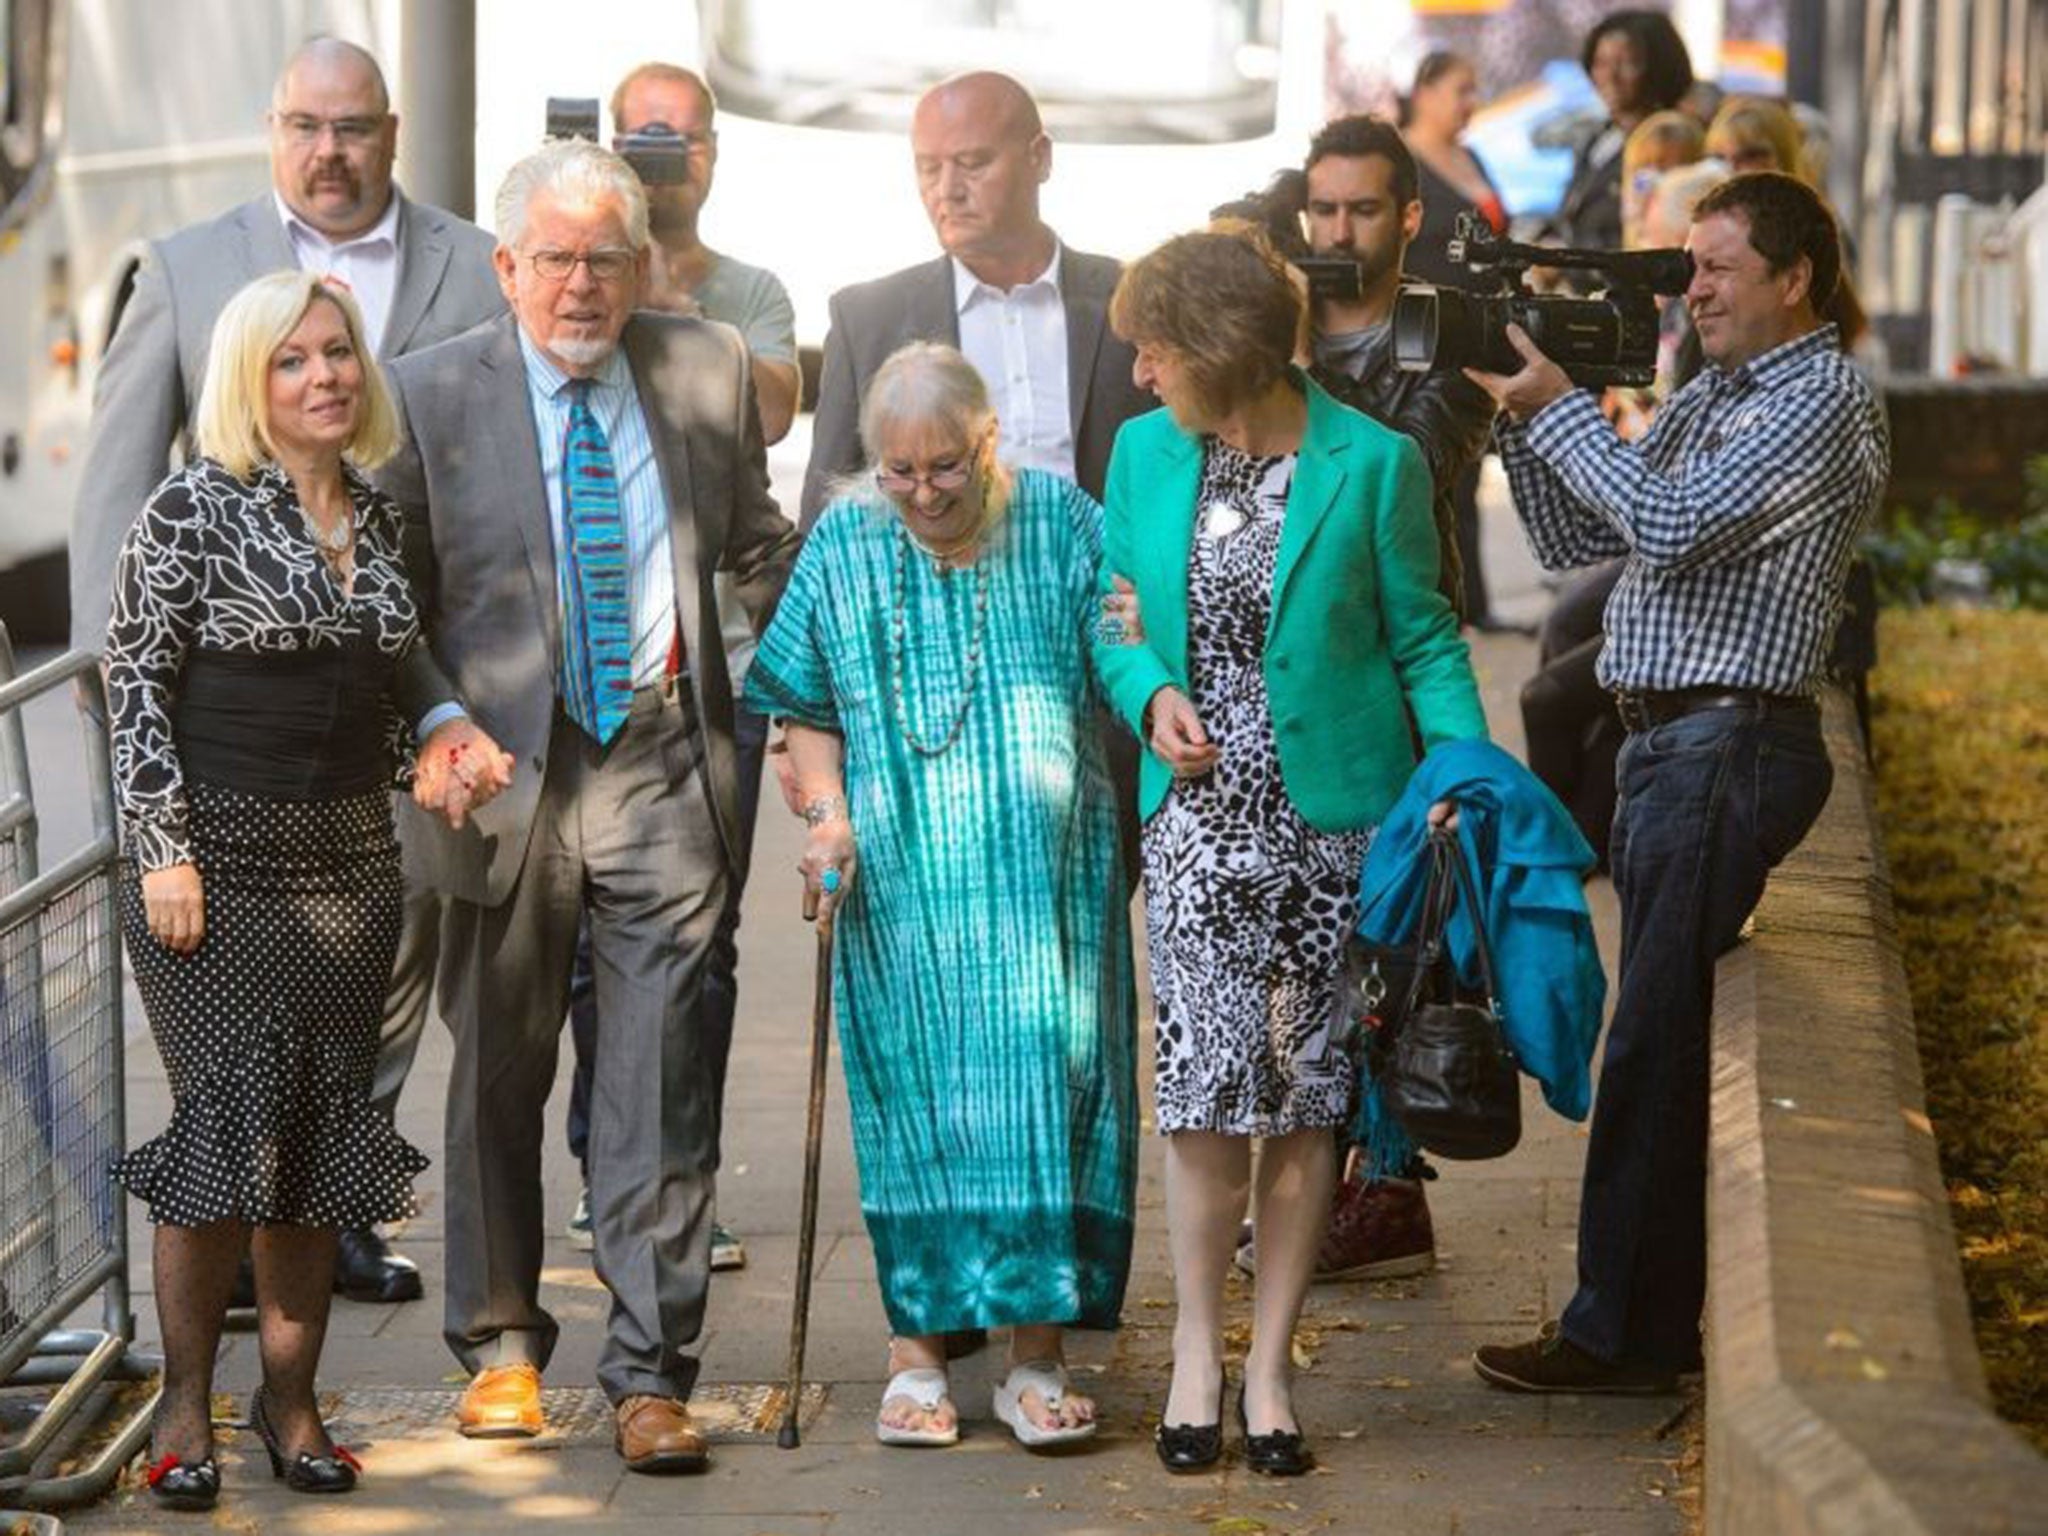 Rolf Harris arriving with daughter Bindi (left), wife Alwen and niece Jenny at Southwark Crown Court on 30 June 2014. He was convicted of 12 counts of indecent assault between 1968 and 1986